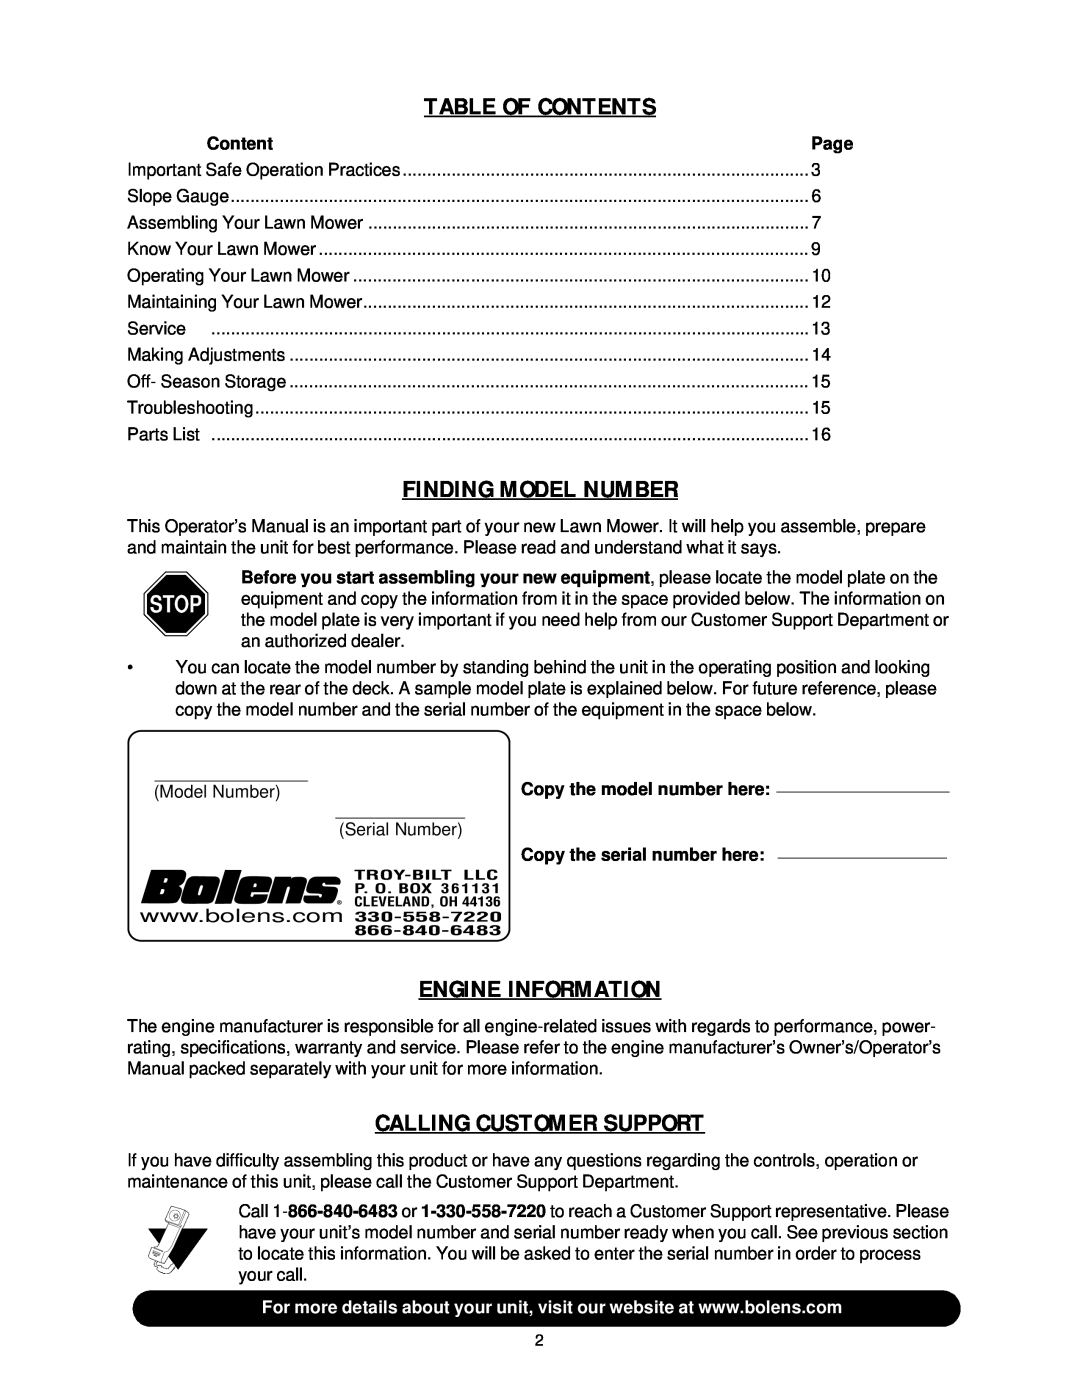 Bolens 436 manual Table Of Contents, Finding Model Number, Engine Information, Calling Customer Support 